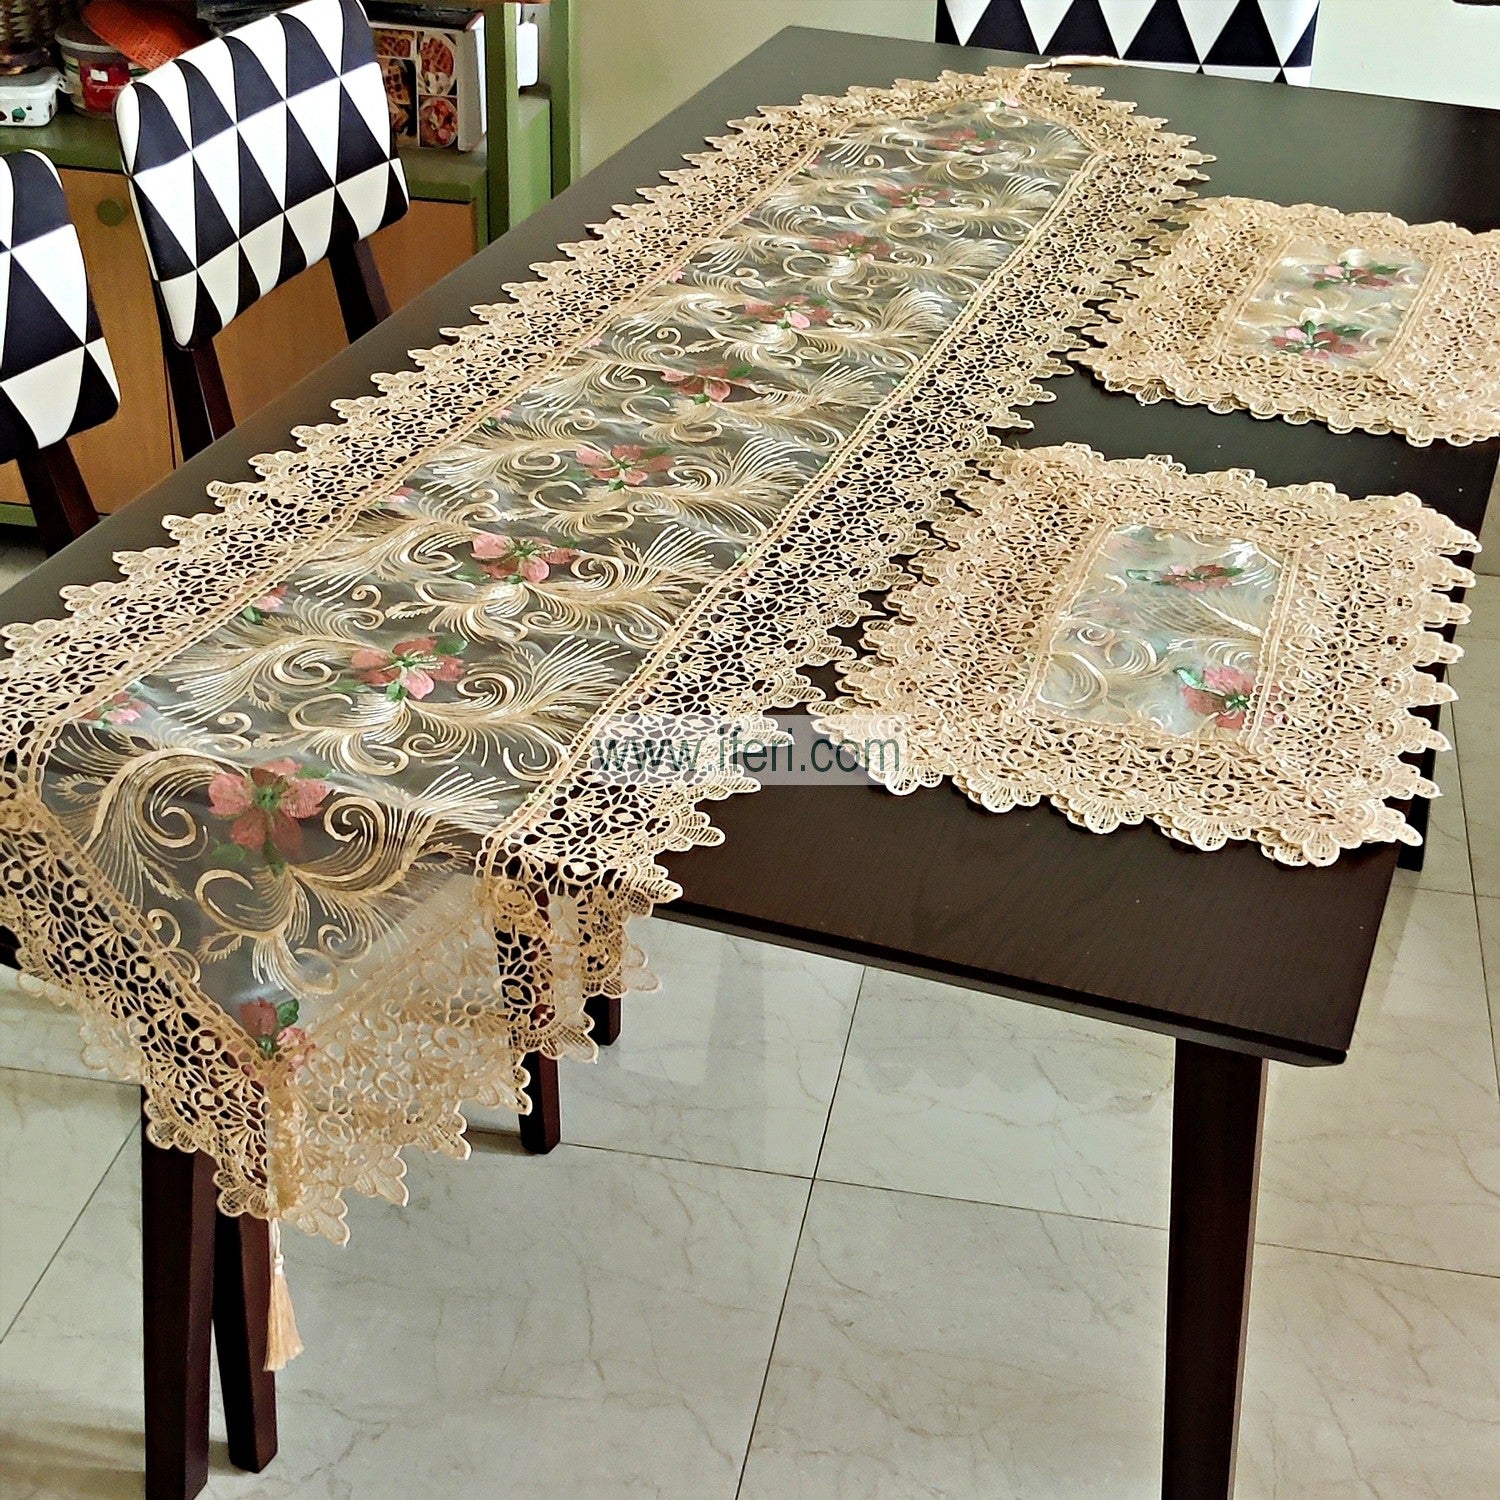 7pcs Luxury Embroidered Lace Runner & Placemats Set RJ3592